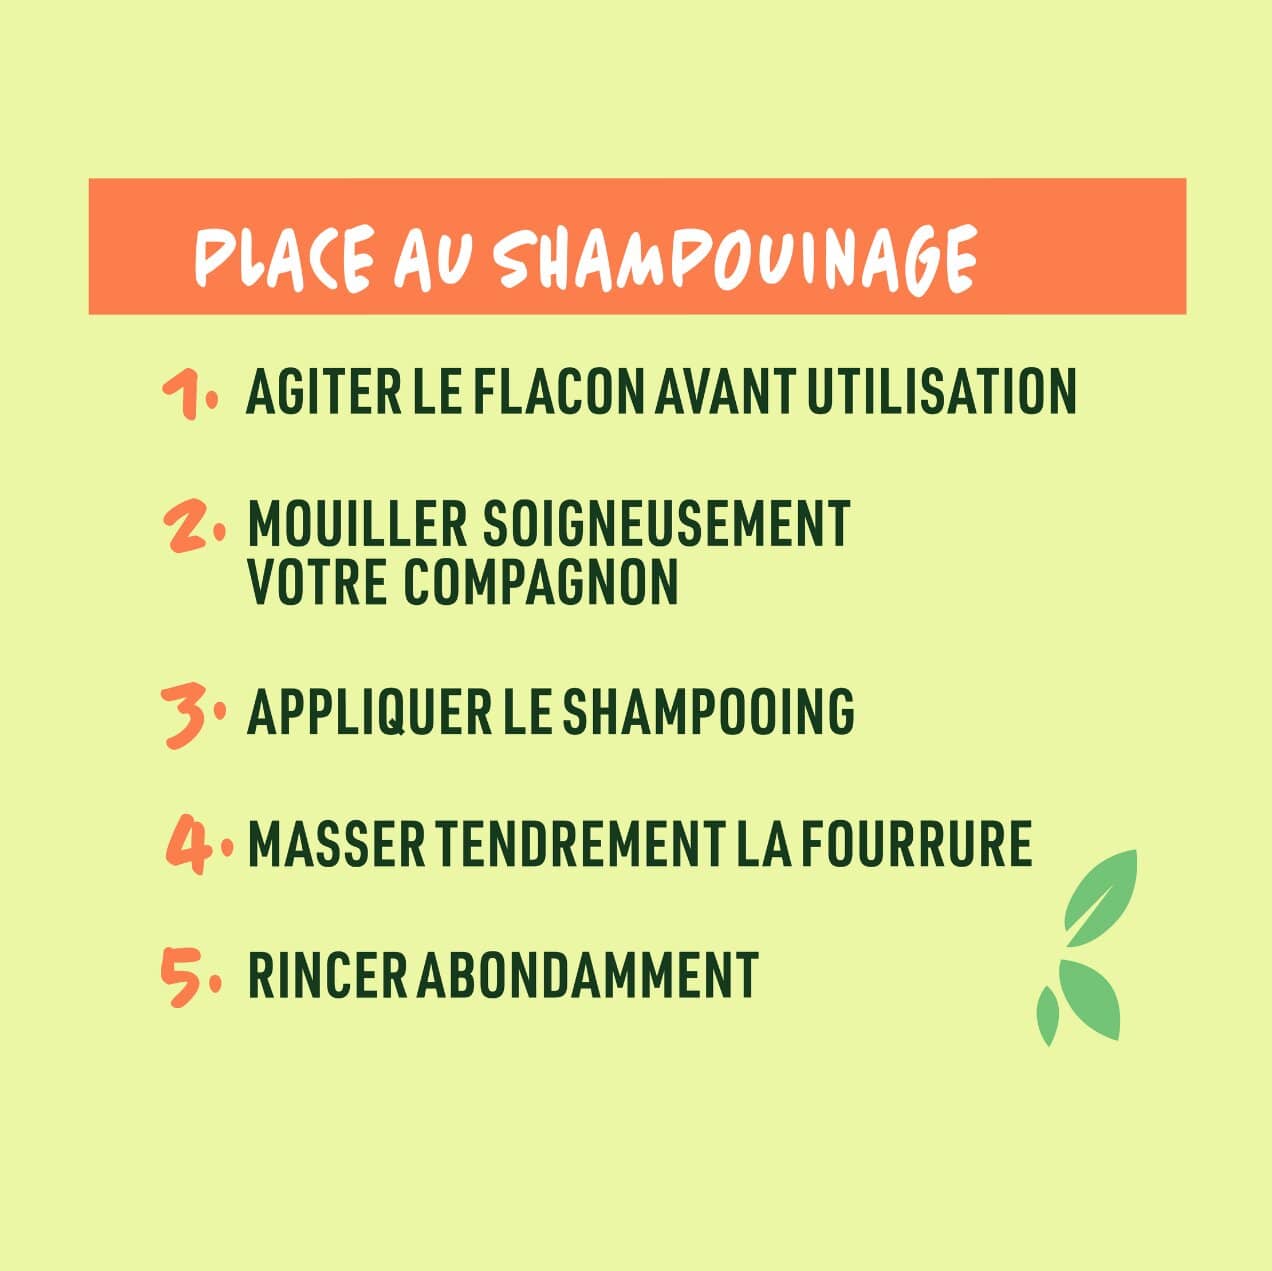 conseil shampouinage chien shampoing DYI chien usage fréquent Vetocanis